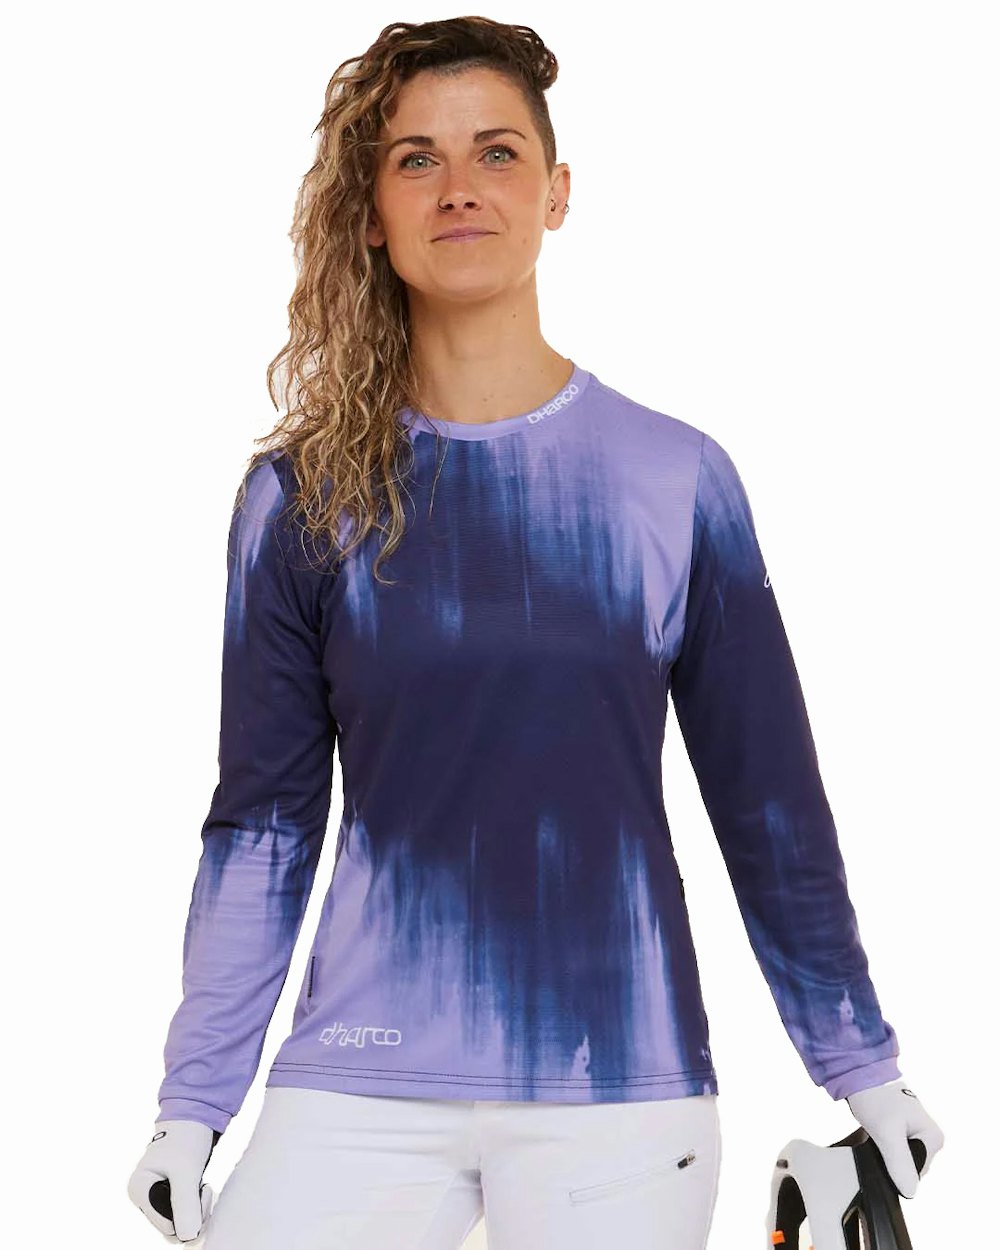 Dharco Womens Gravity Jersey